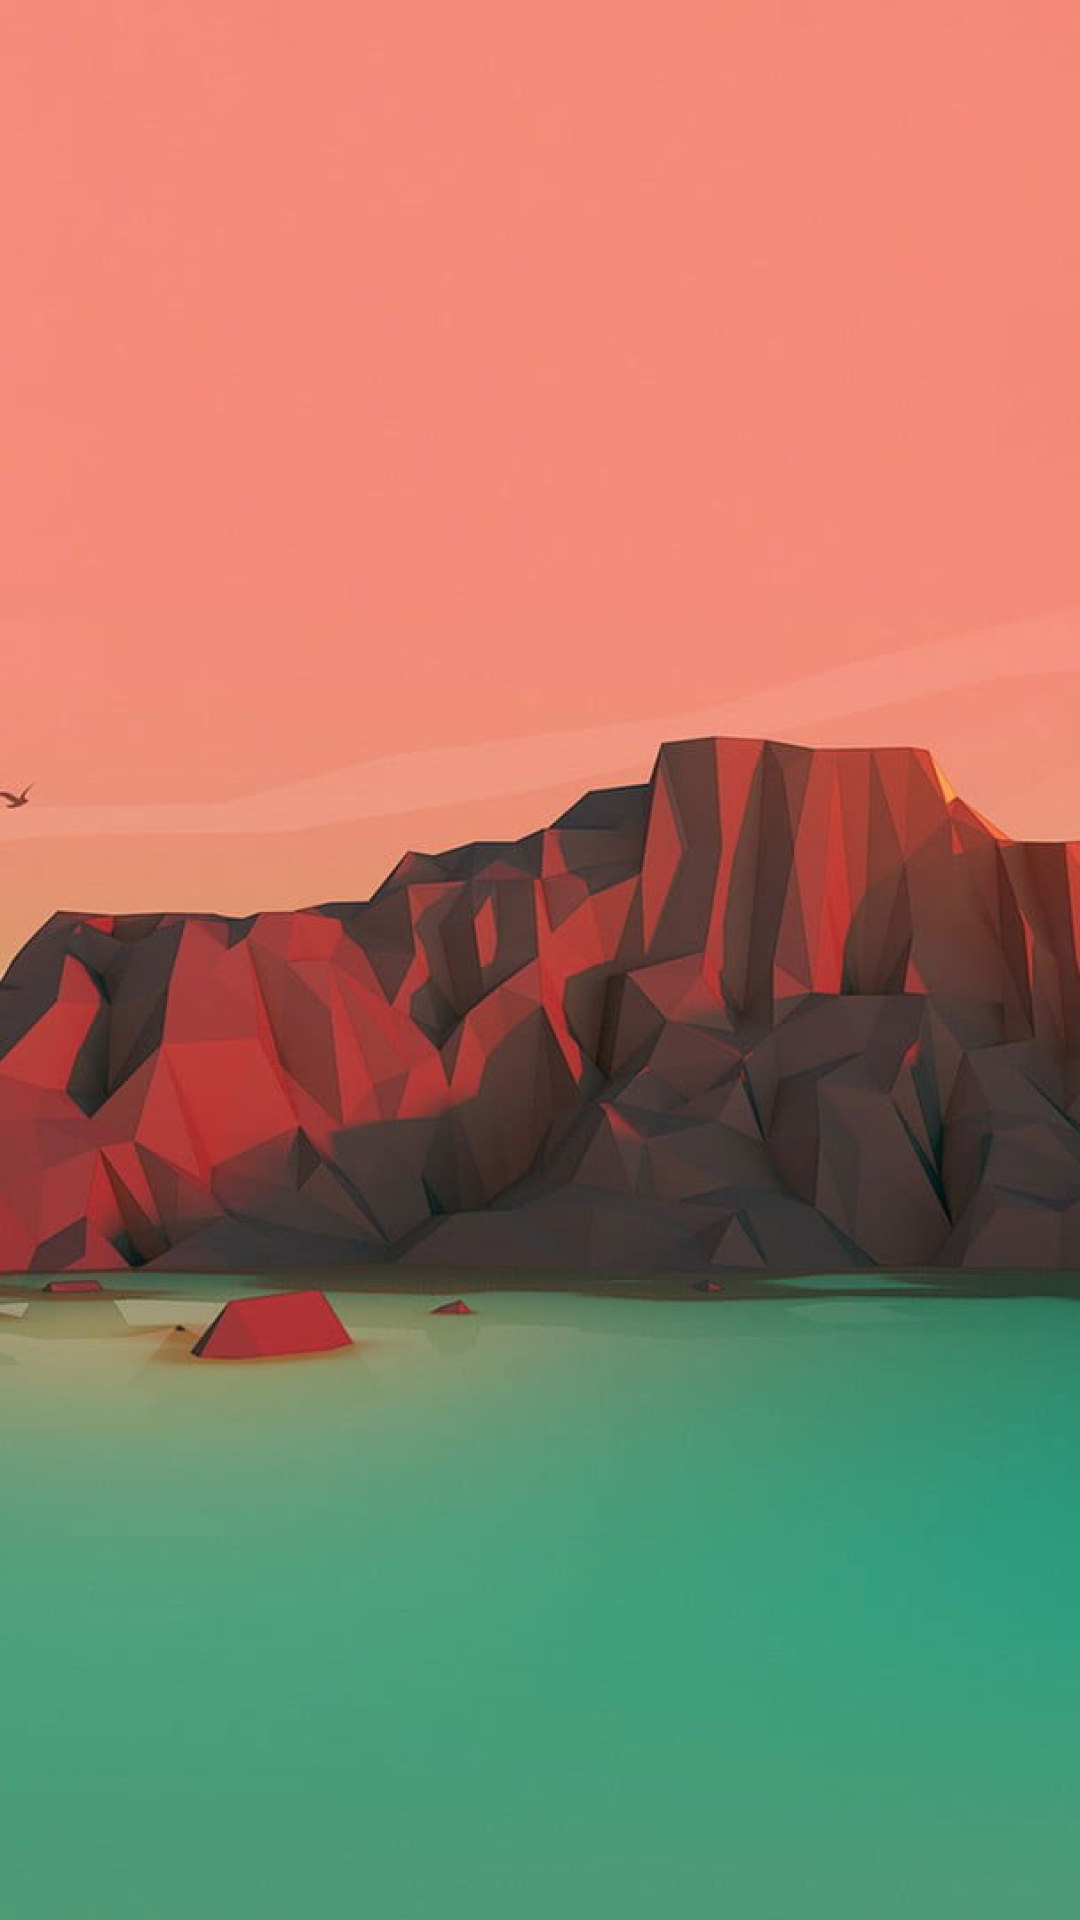 Brown Mountain Illustration Wallpaper, Sunset, Digital Art, Mountains, Low Poly • Wallpaper For You